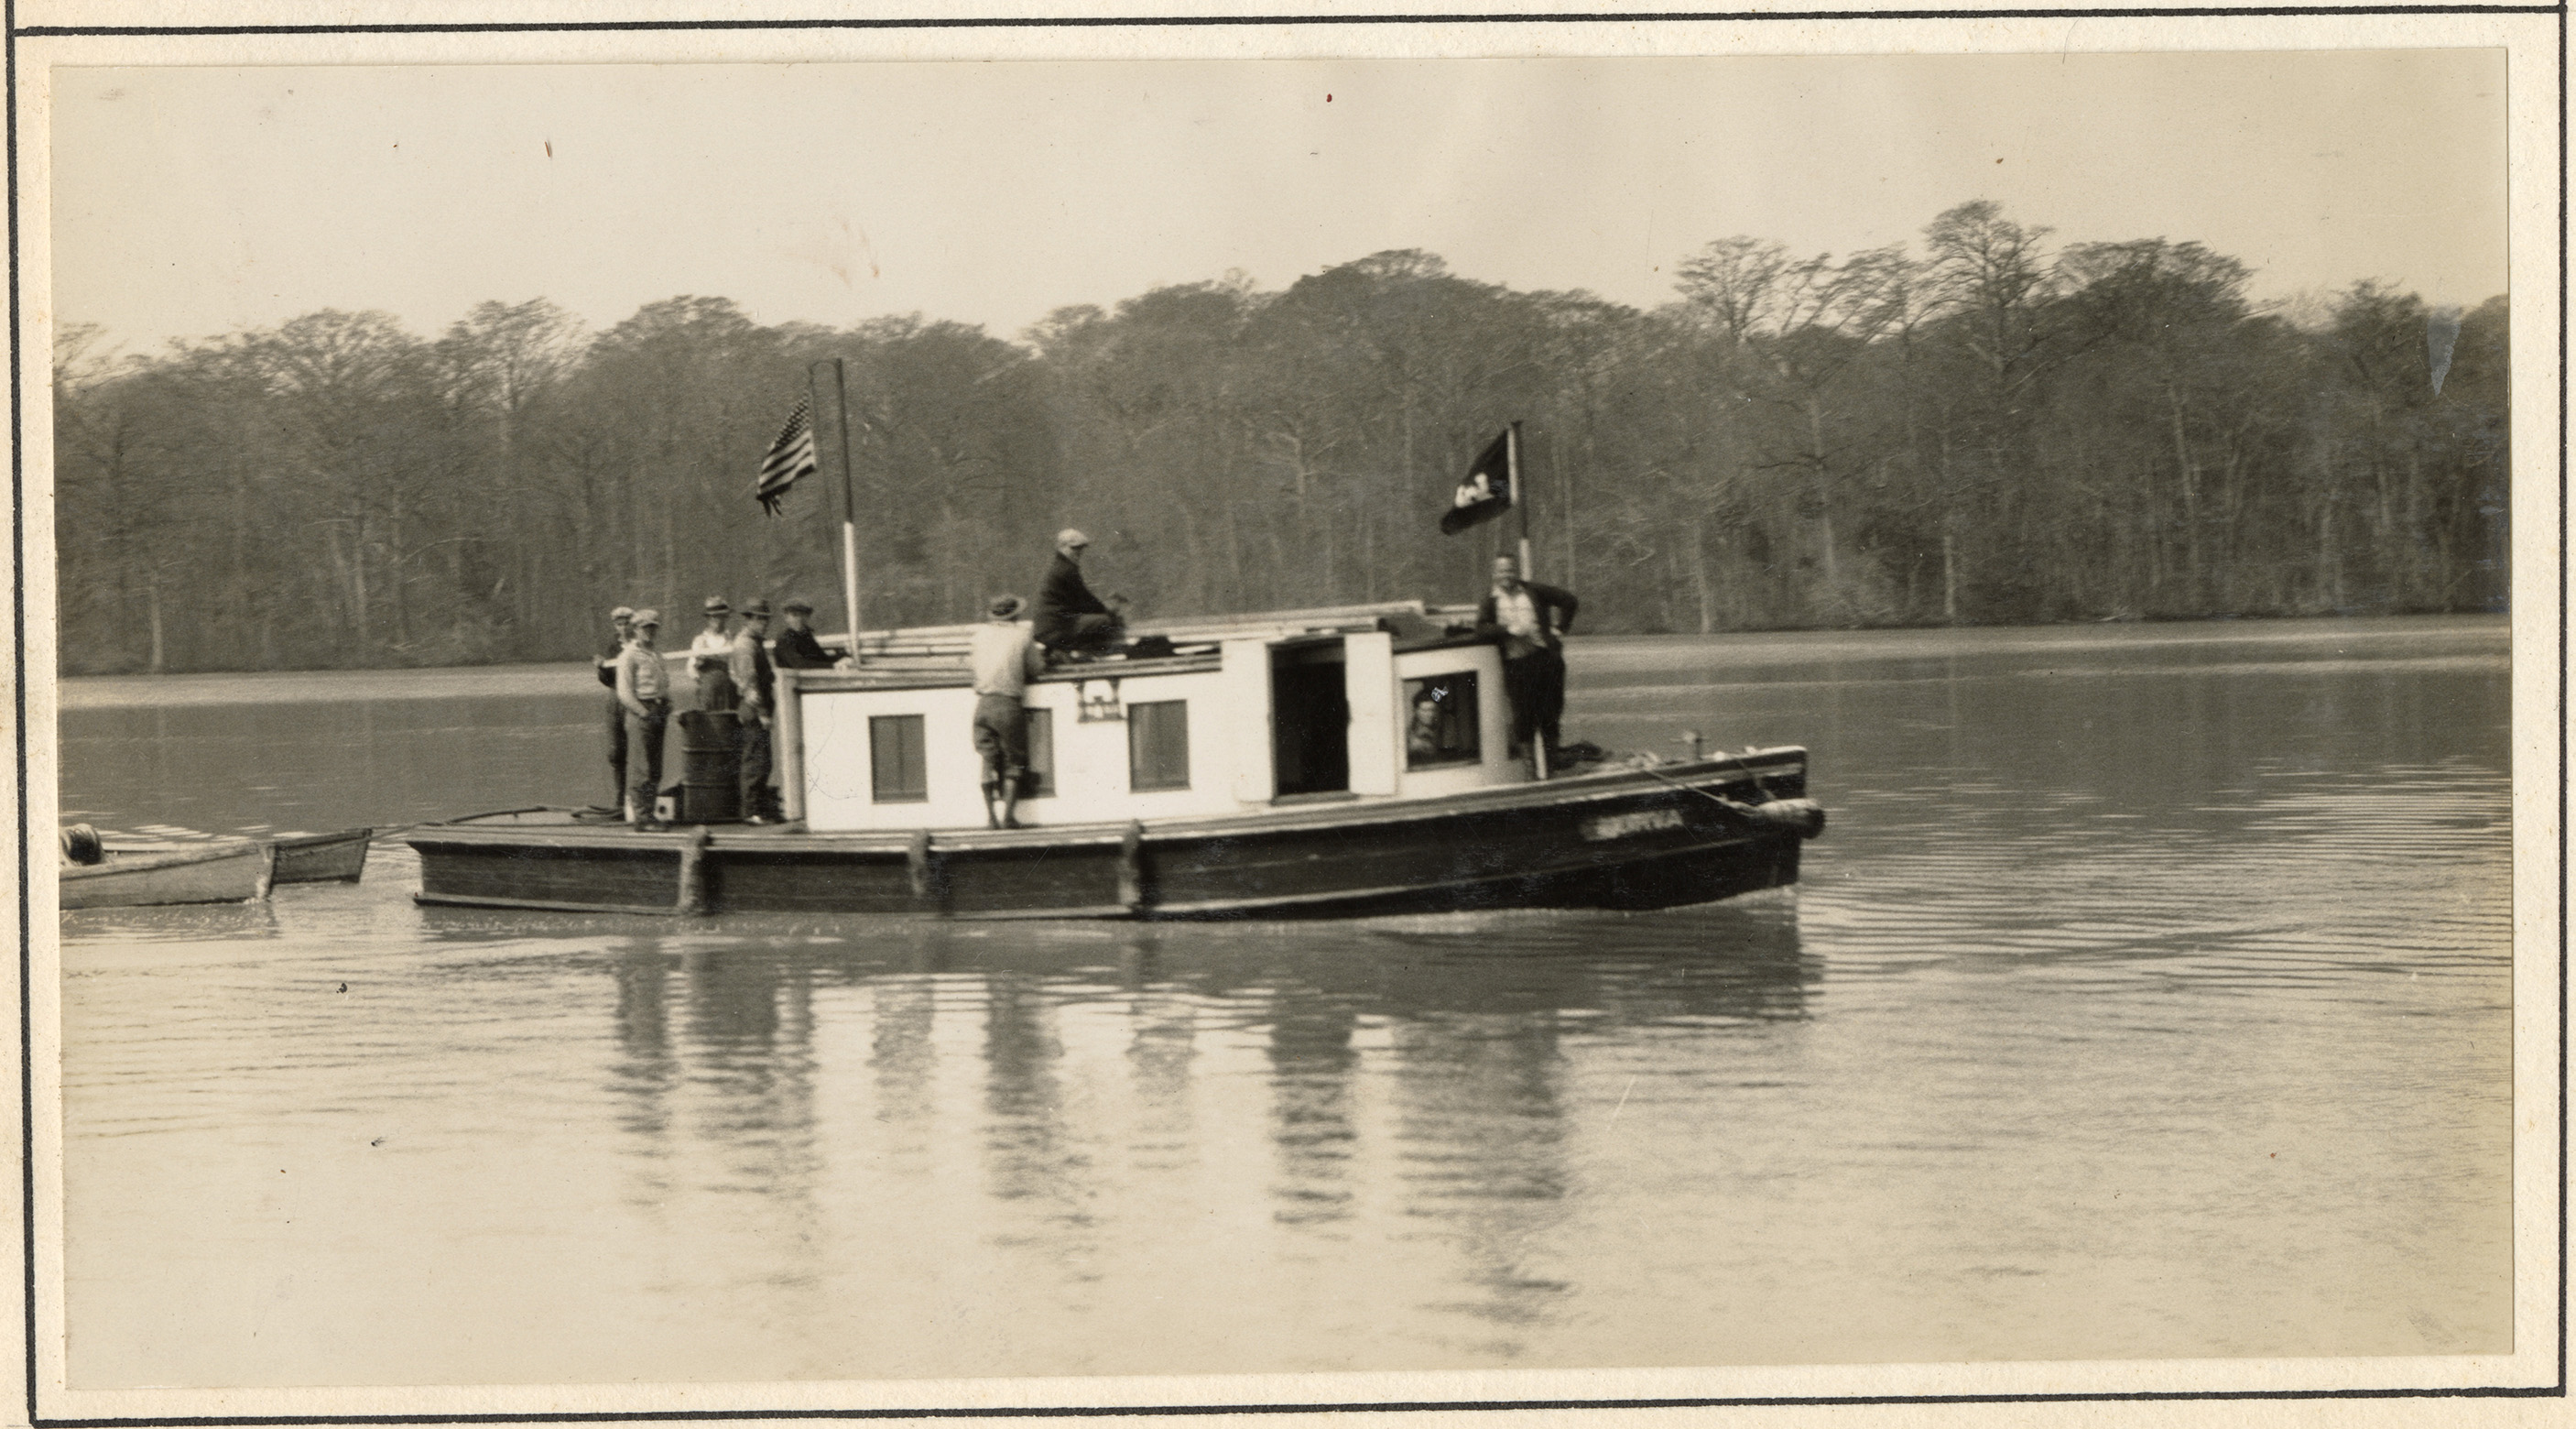 Small boat with crew of 5 on deck in calm water